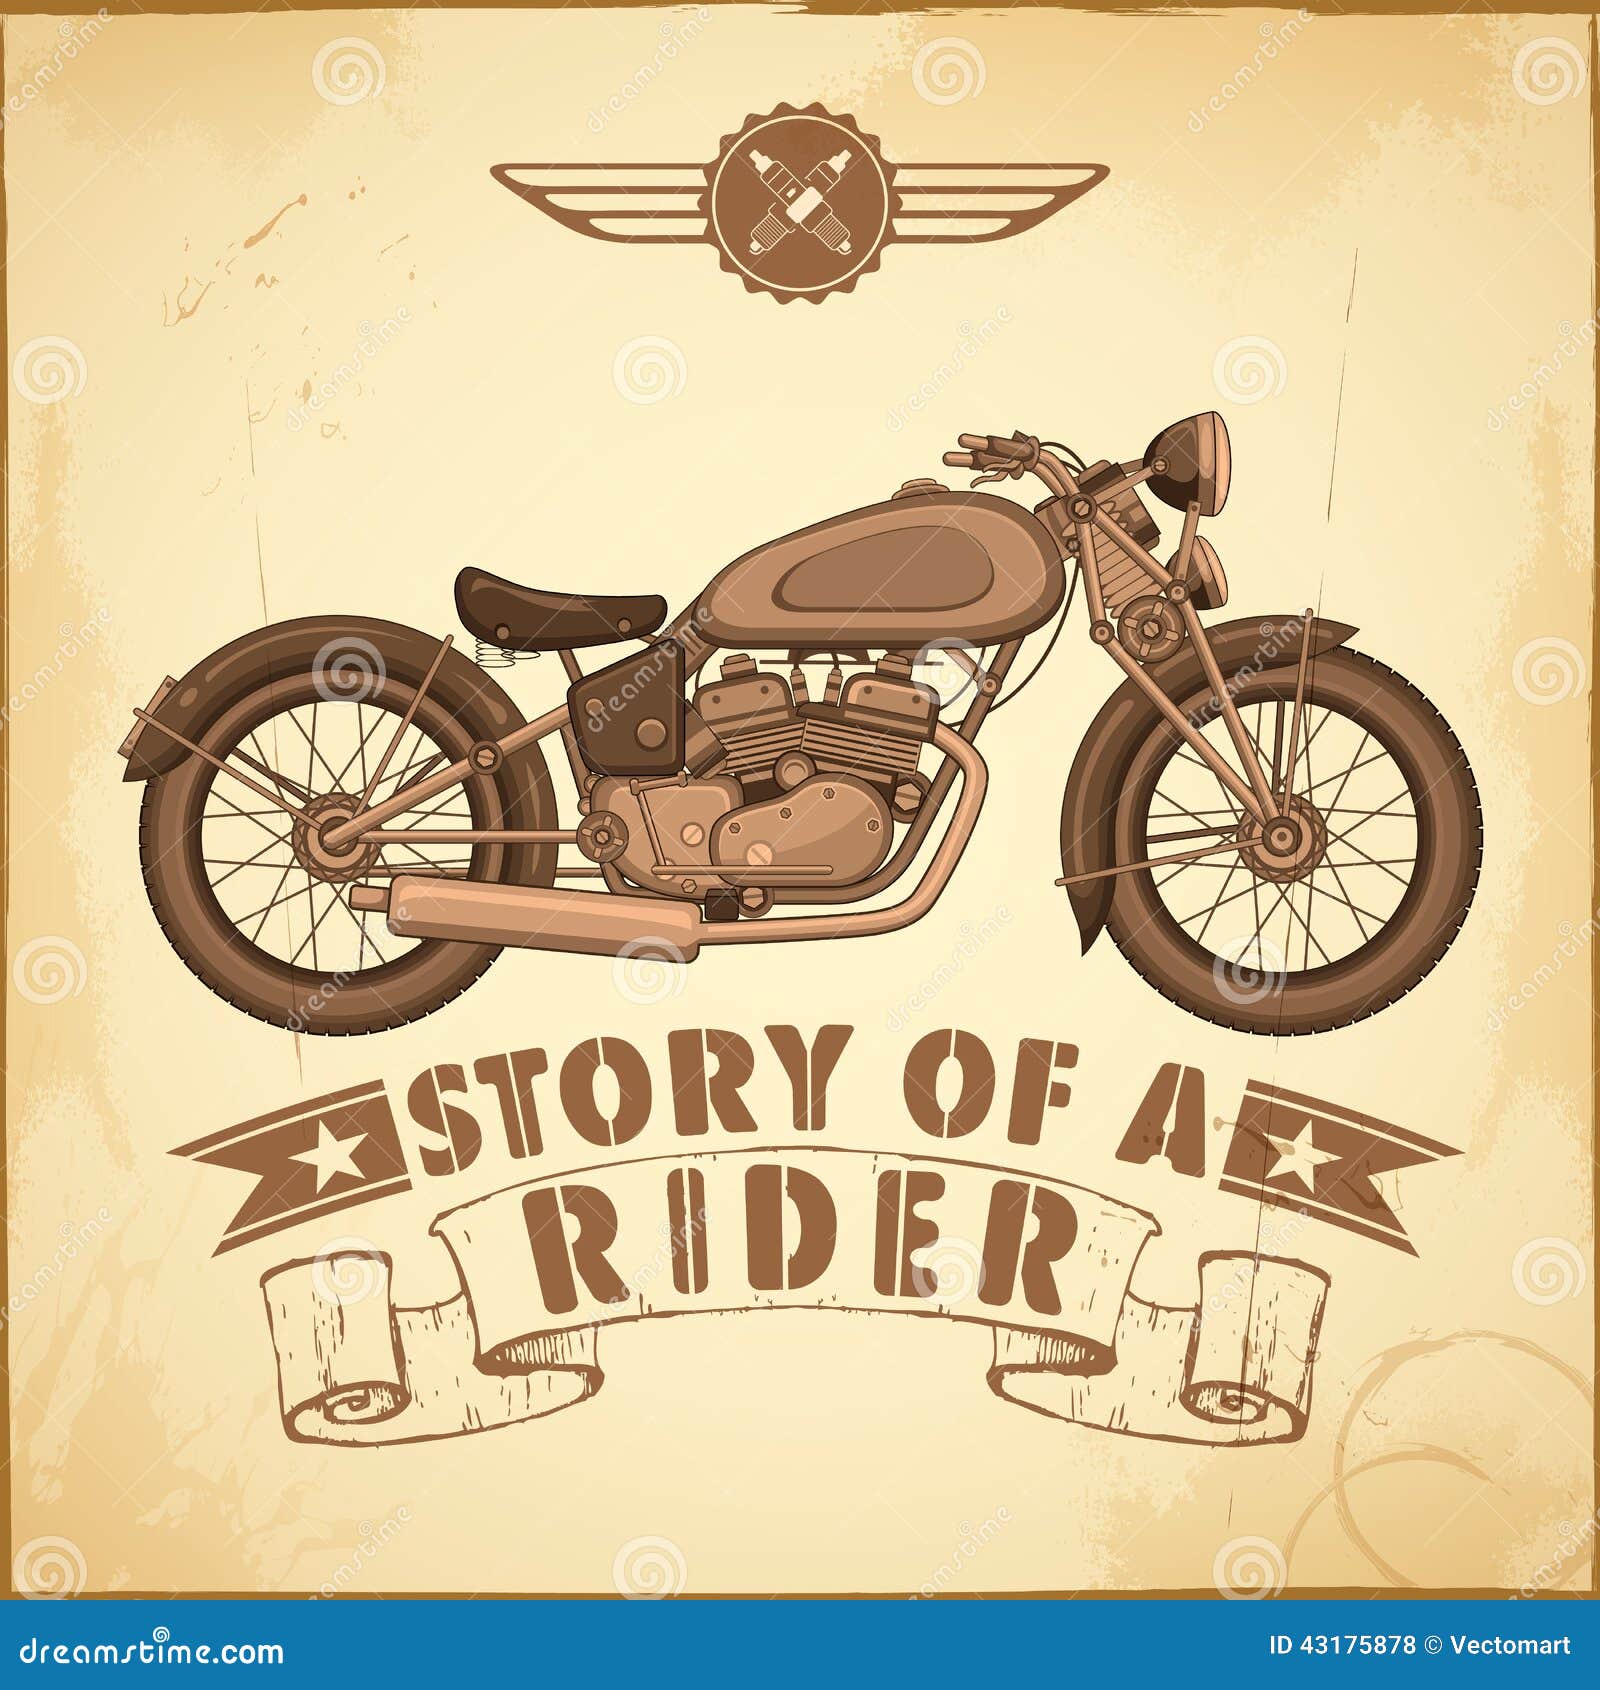 vintage motorcycle clipart - photo #19